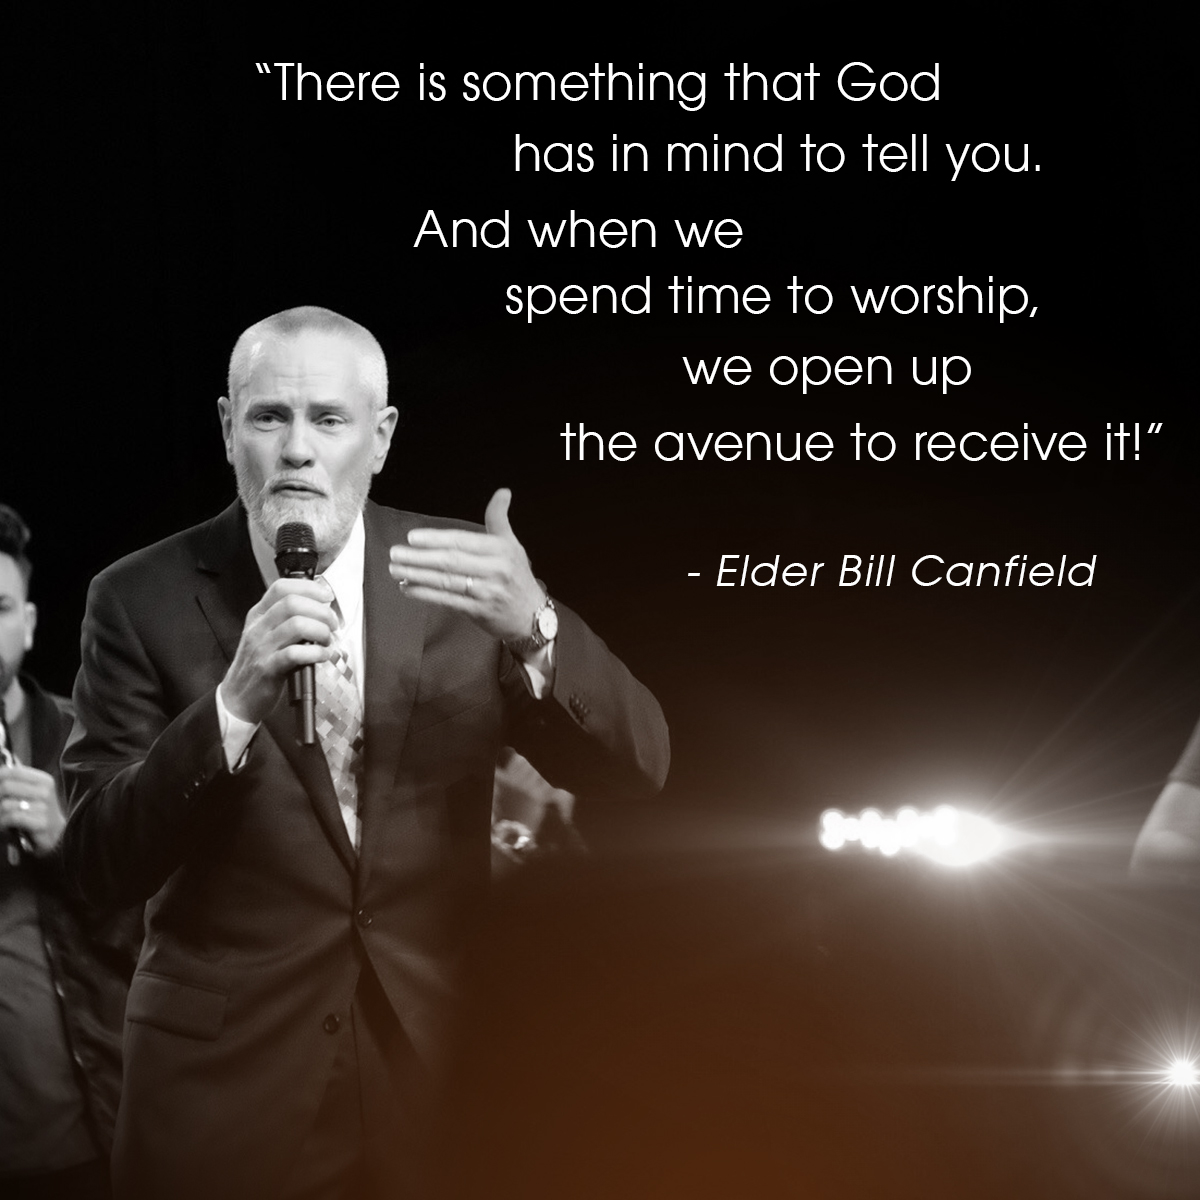 “There is something that God has in mind to tell you. And when we spend time to worship, we open up the avenue to receive it!” – Elder Bill Canfield